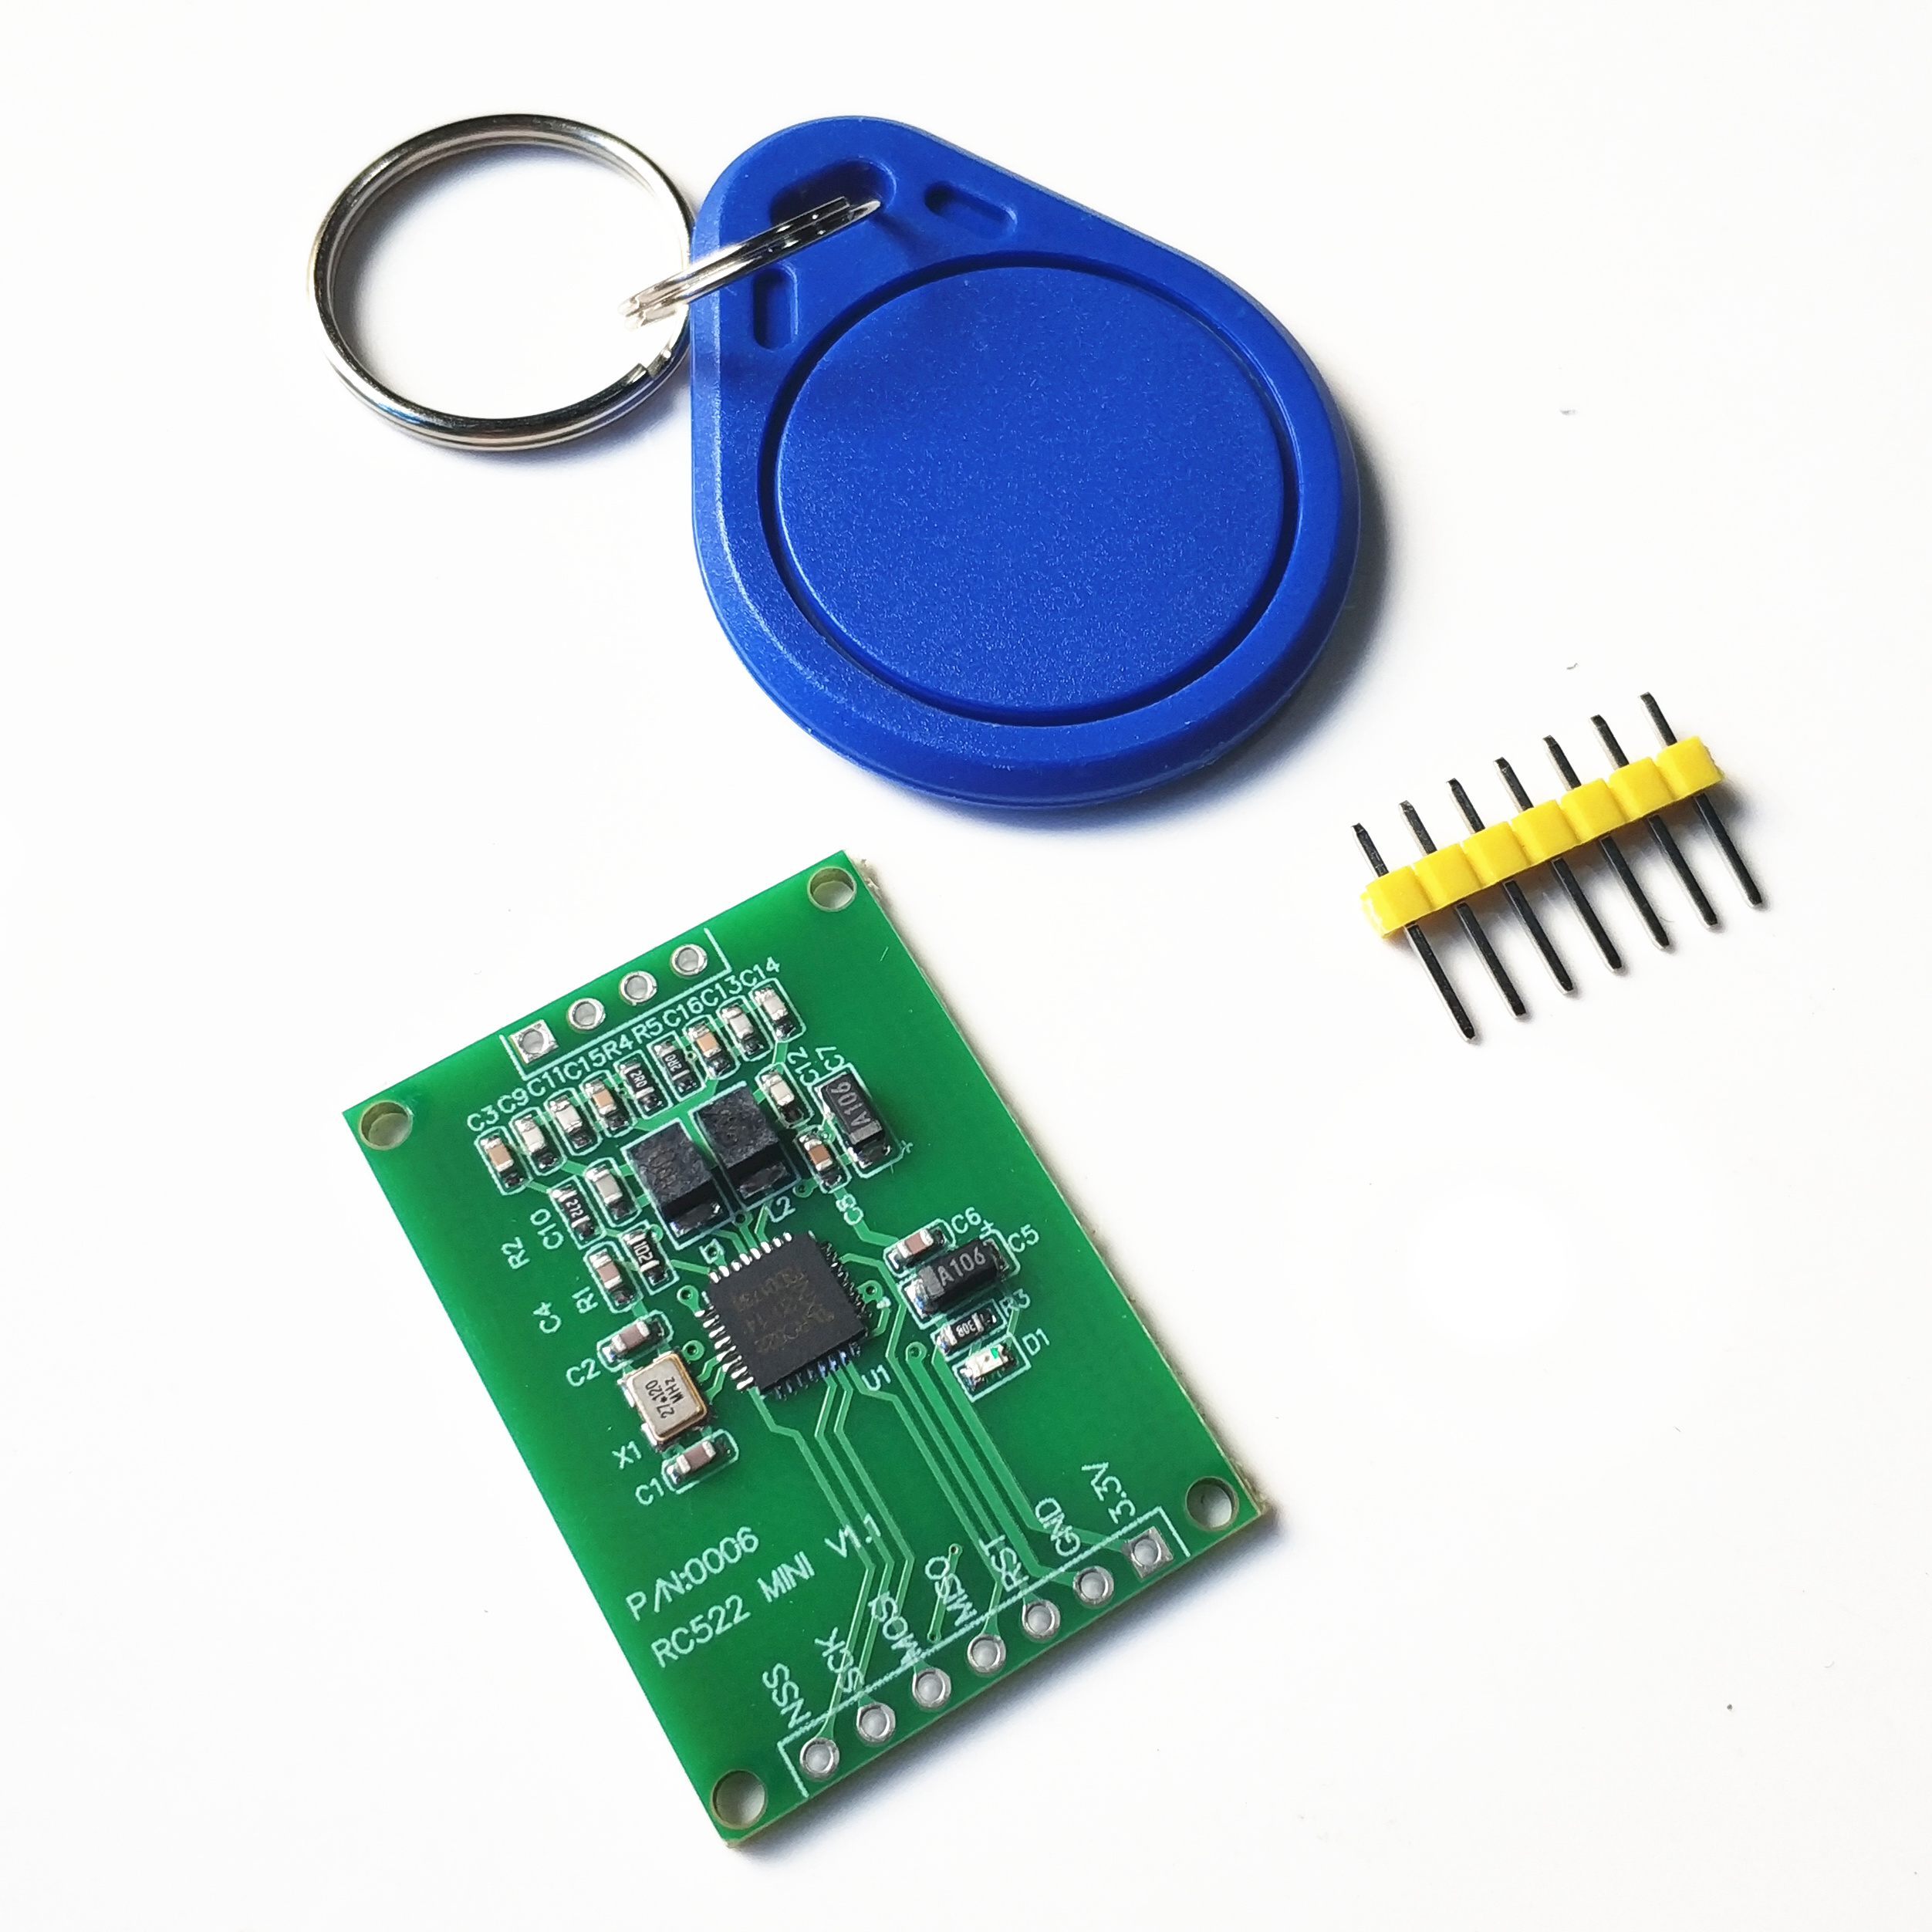 Mfrc522 rc522 RFID IC card inductive read / write module small size mini version 13.56MHz